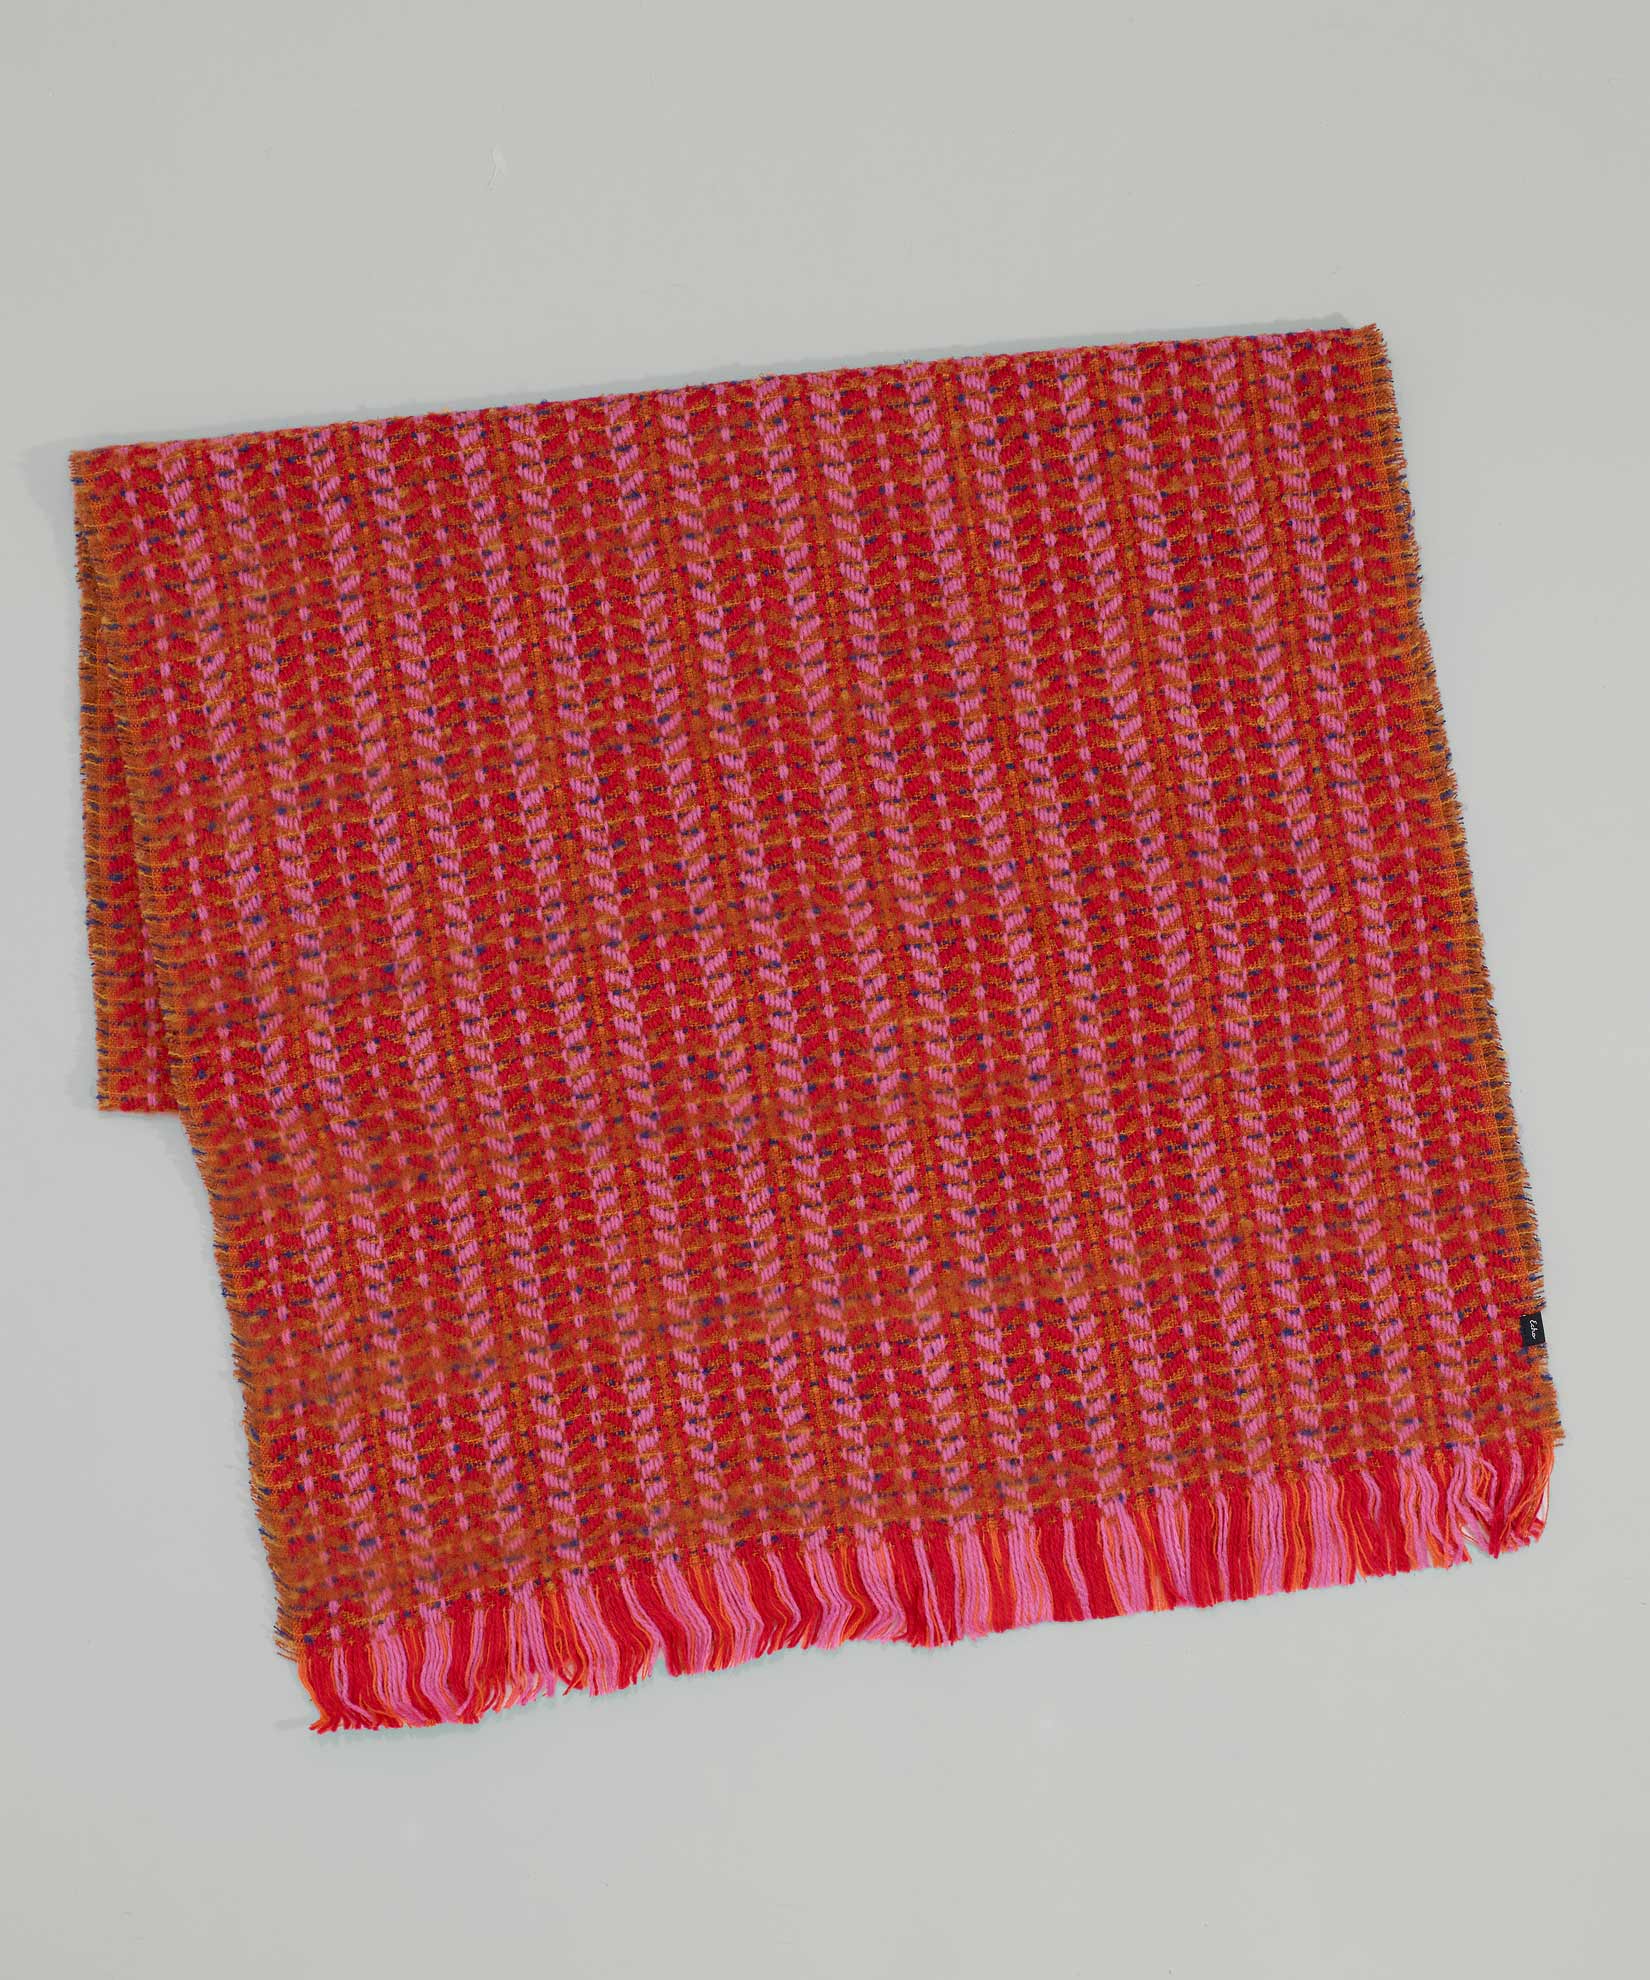 Multistitch Oblong in color Cherry Red